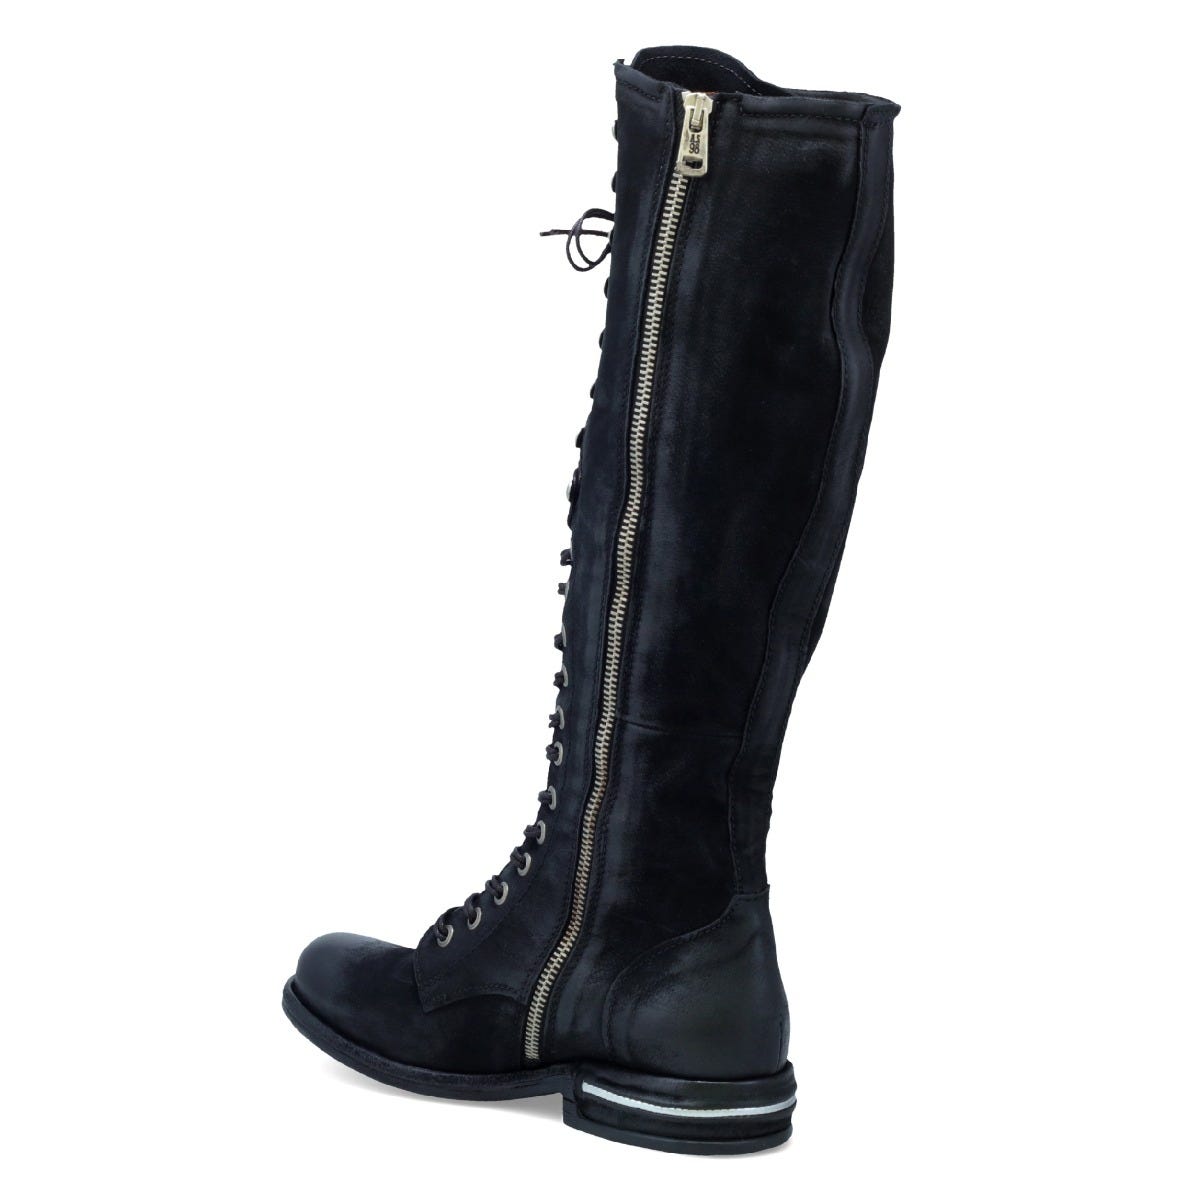 Inner back side view of the a.s.98 trillie tall boot in black. This flat knee-high leather boot has a lace up front, a inner side zipper, and a silver line in the heel. 